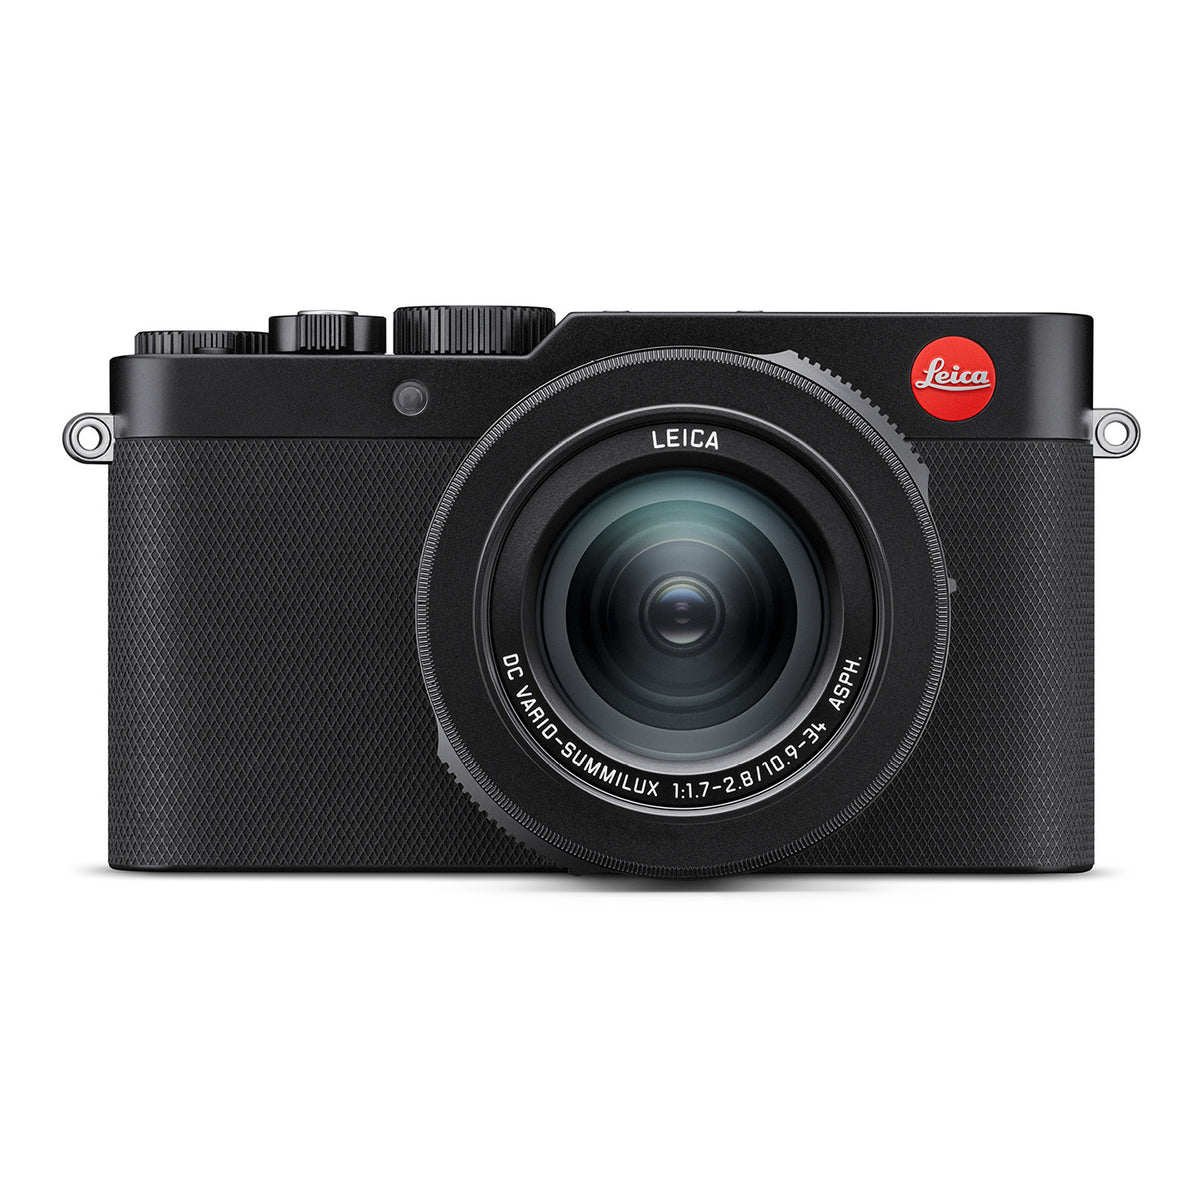 James Bond Leica D-Lux 7 007 Camera - Numbered Edition (Pre-order)